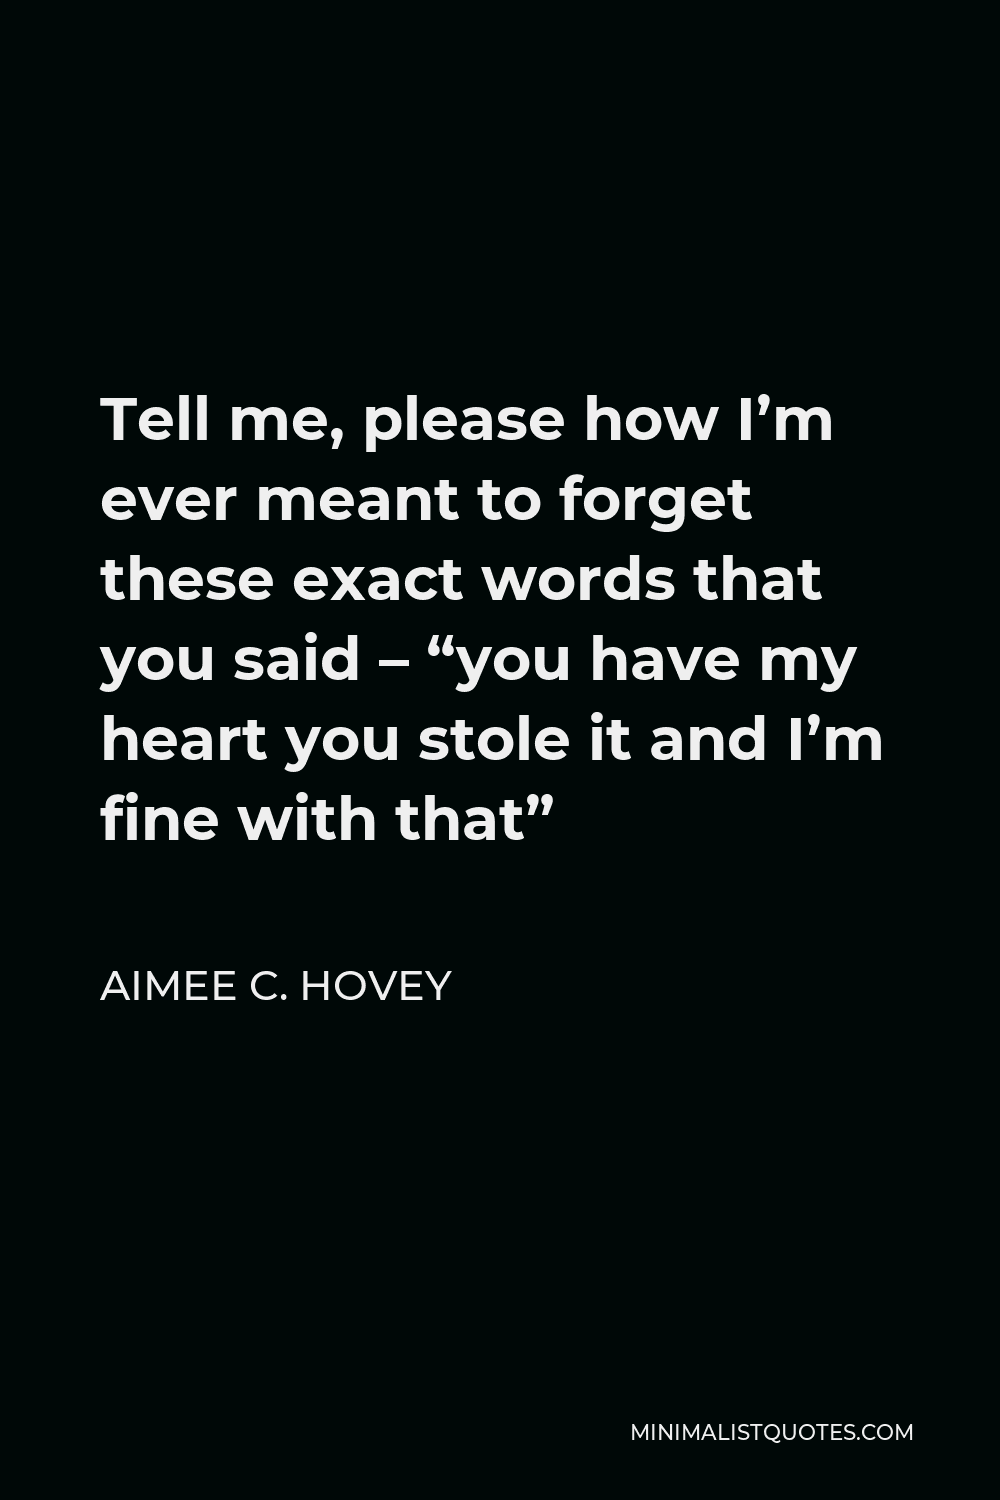 Aimee C. Hovey Quote - Tell me, please how I’m ever meant to forget these exact words that you said – “you have my heart you stole it and I’m fine with that”